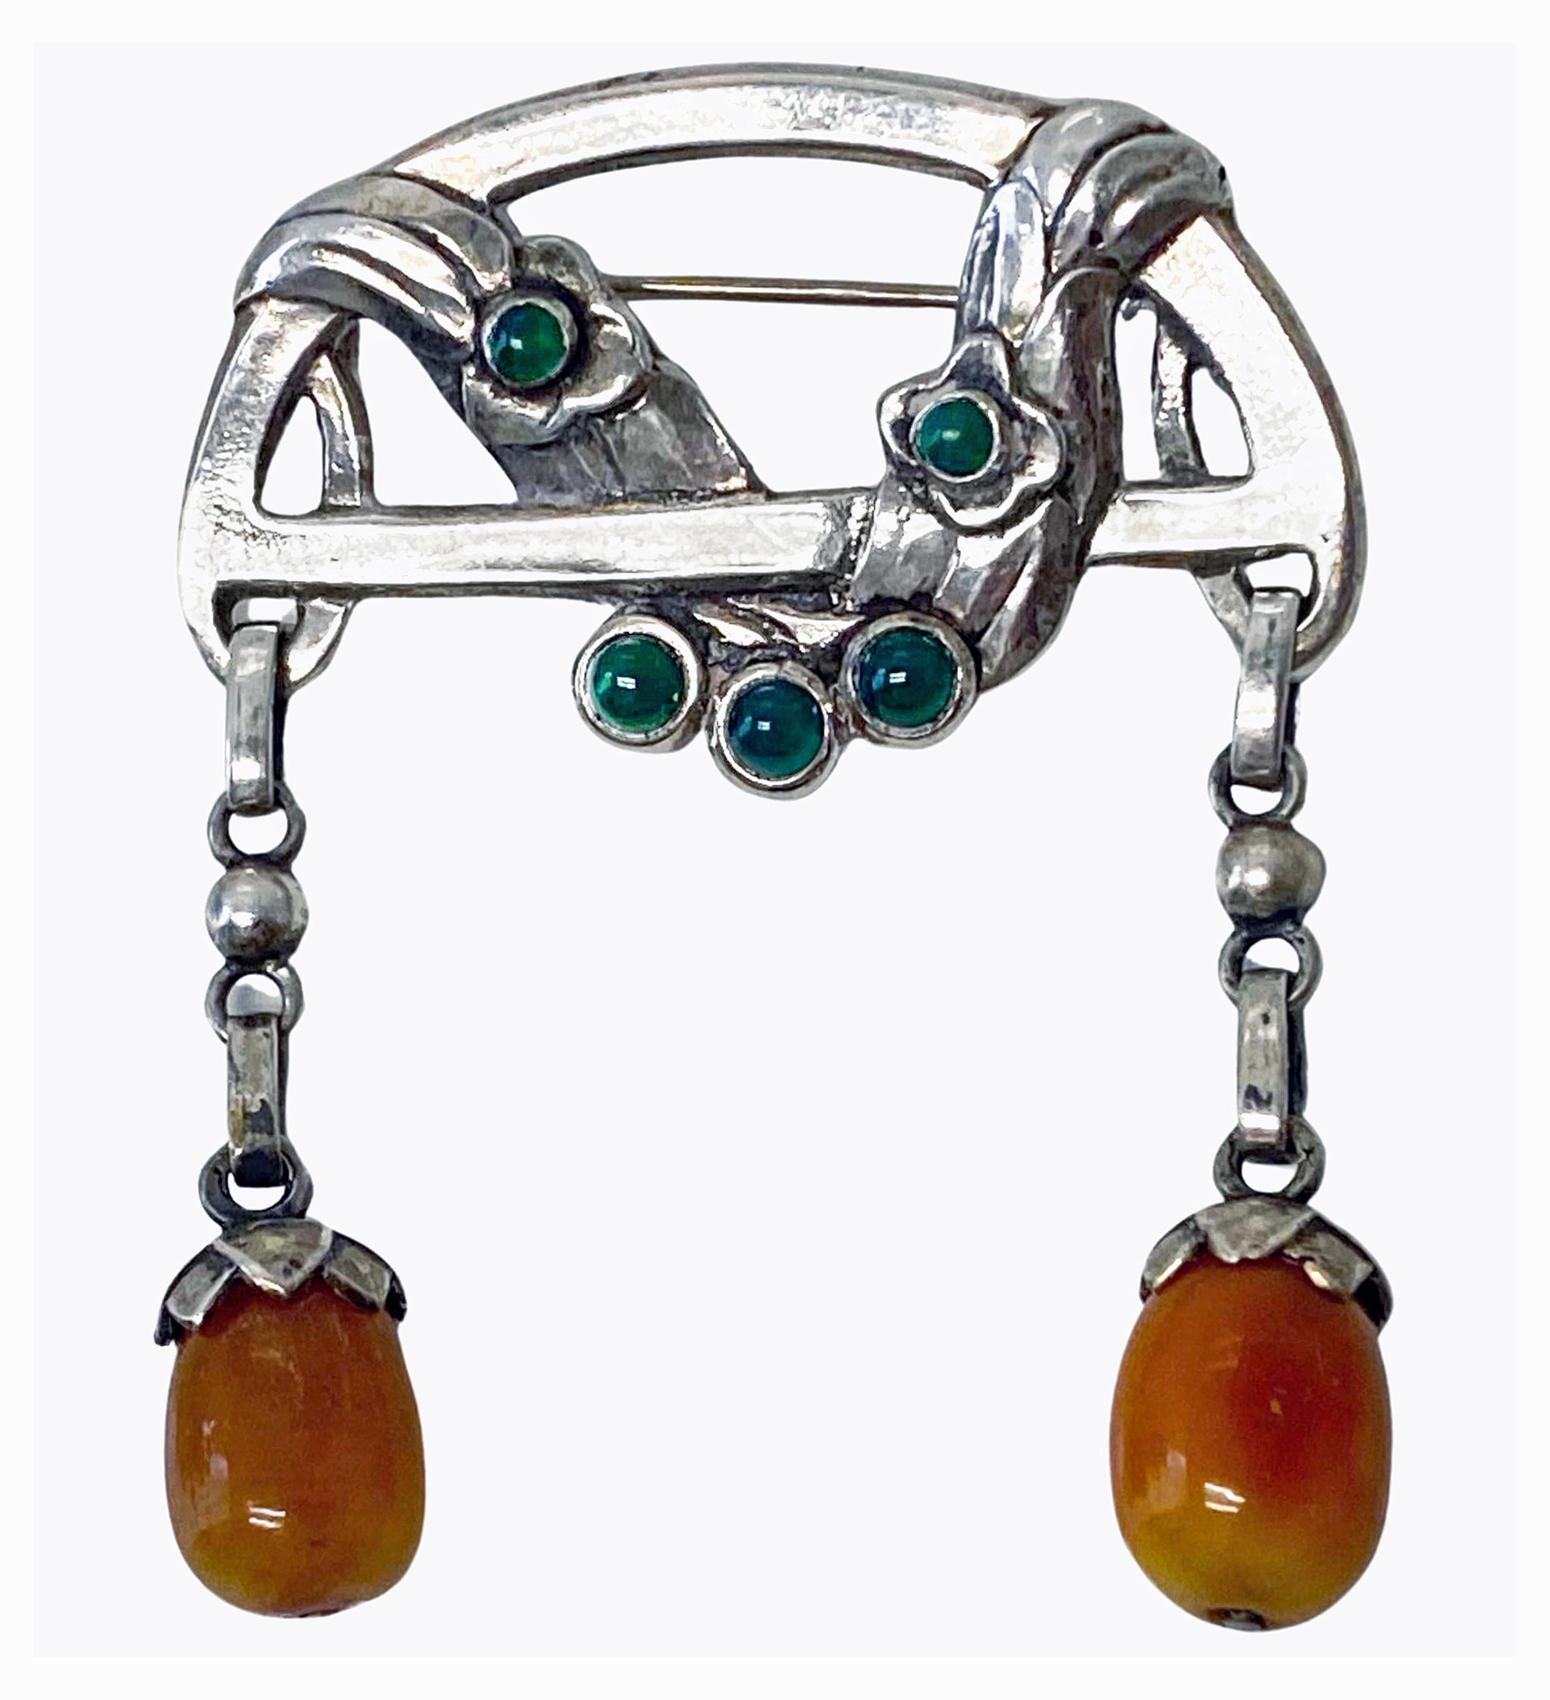 Antique early Georg Jensen brooch C.1909 design #8. The drop brooch with cabochon set green agates and two amber drops, twist foliate design. The reverse with Georg Jensen 828 S Gi 8. Marks for 1909 -1914. Measures 1 7/8